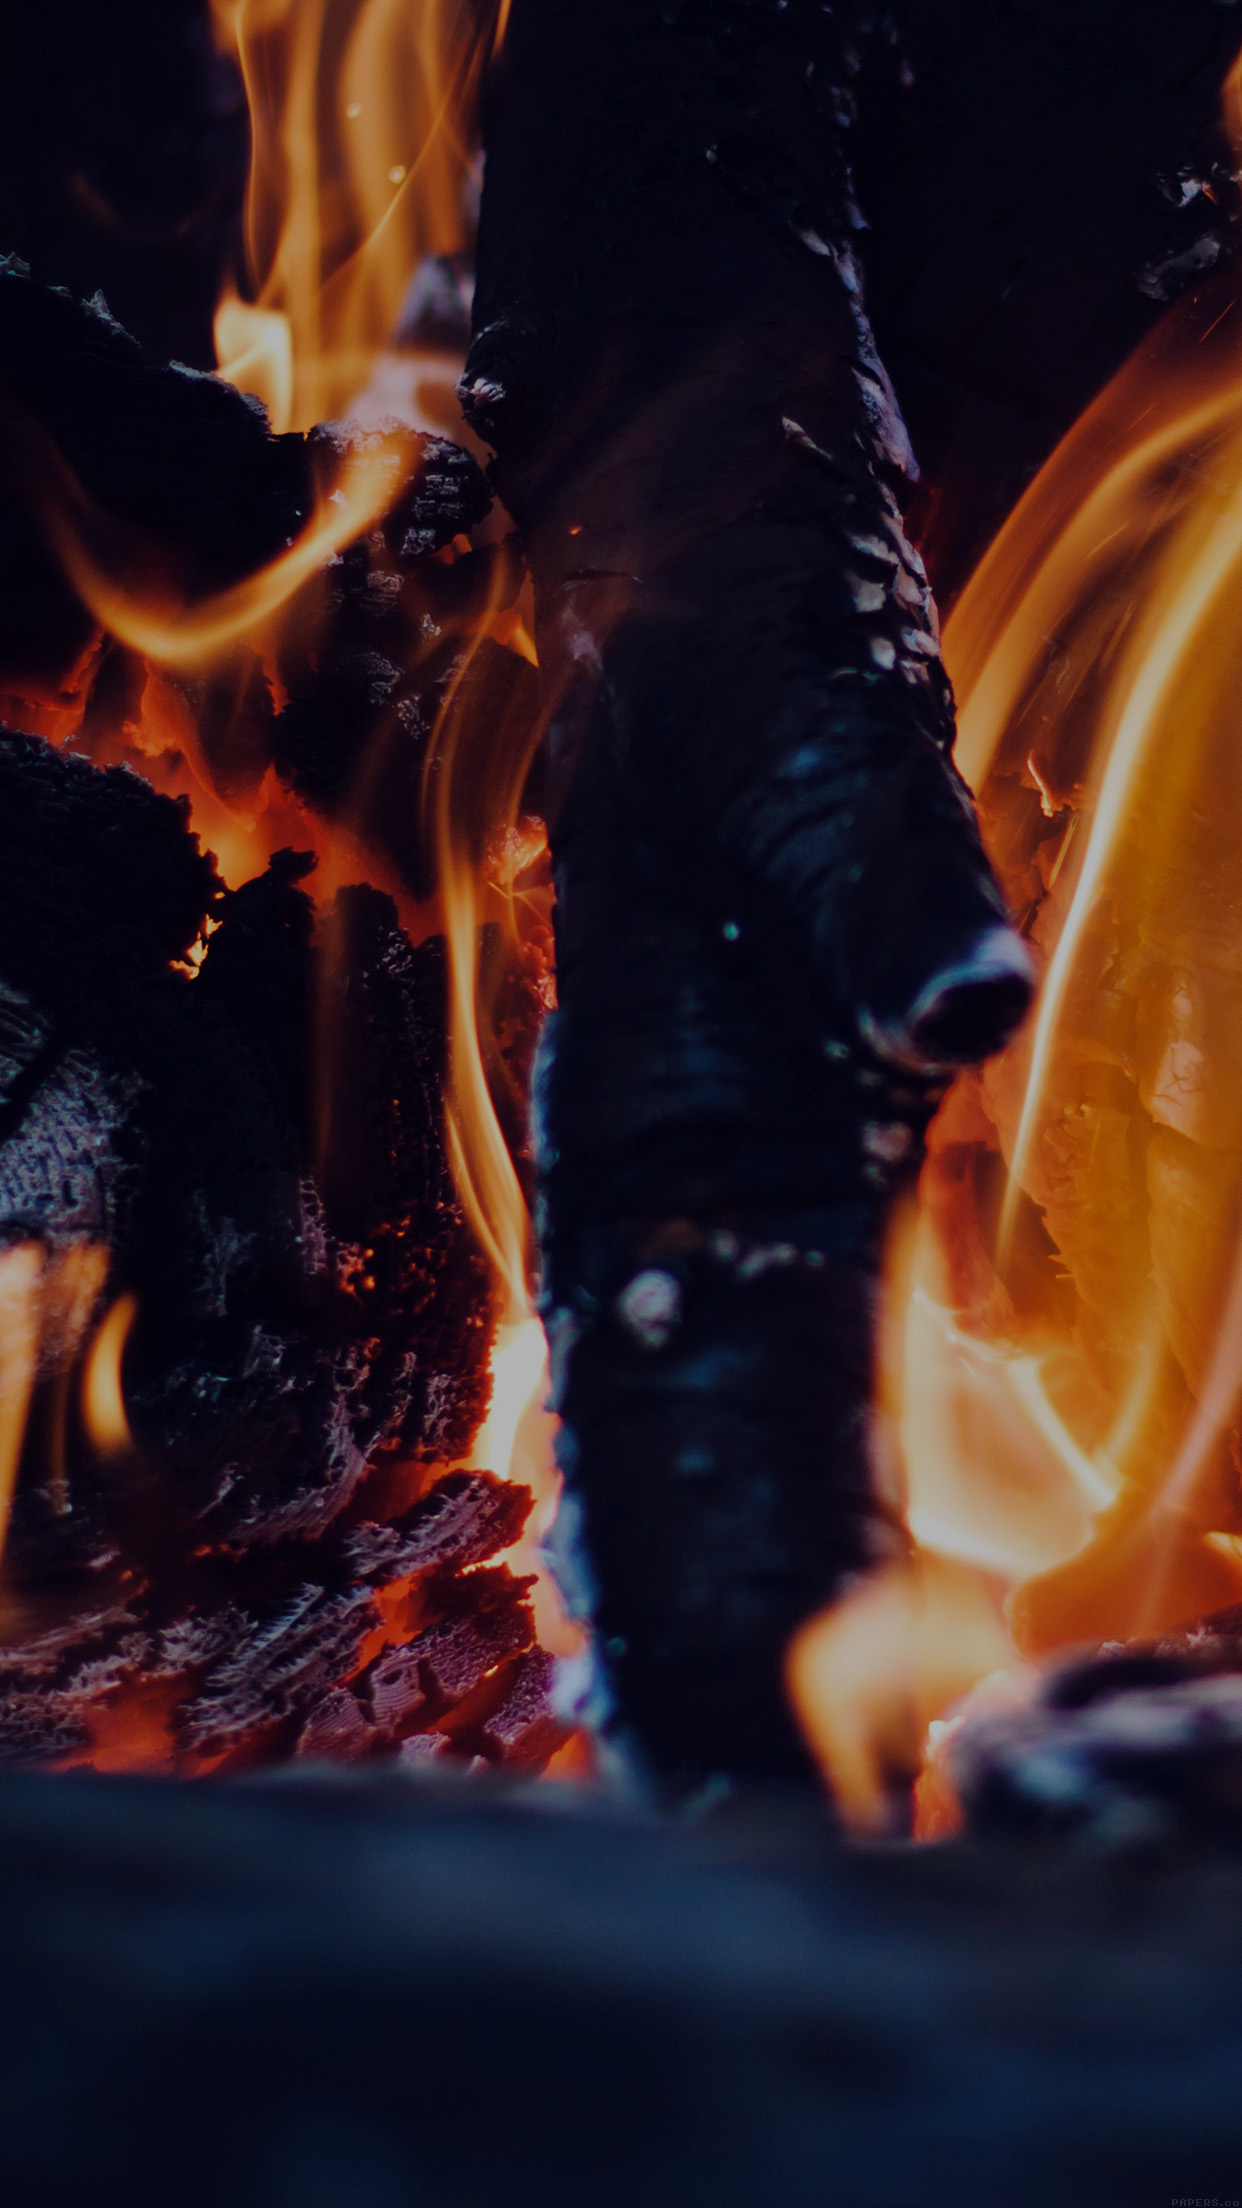 Fire Camp Dark Thomas Lefebvre Nature Android wallpaper